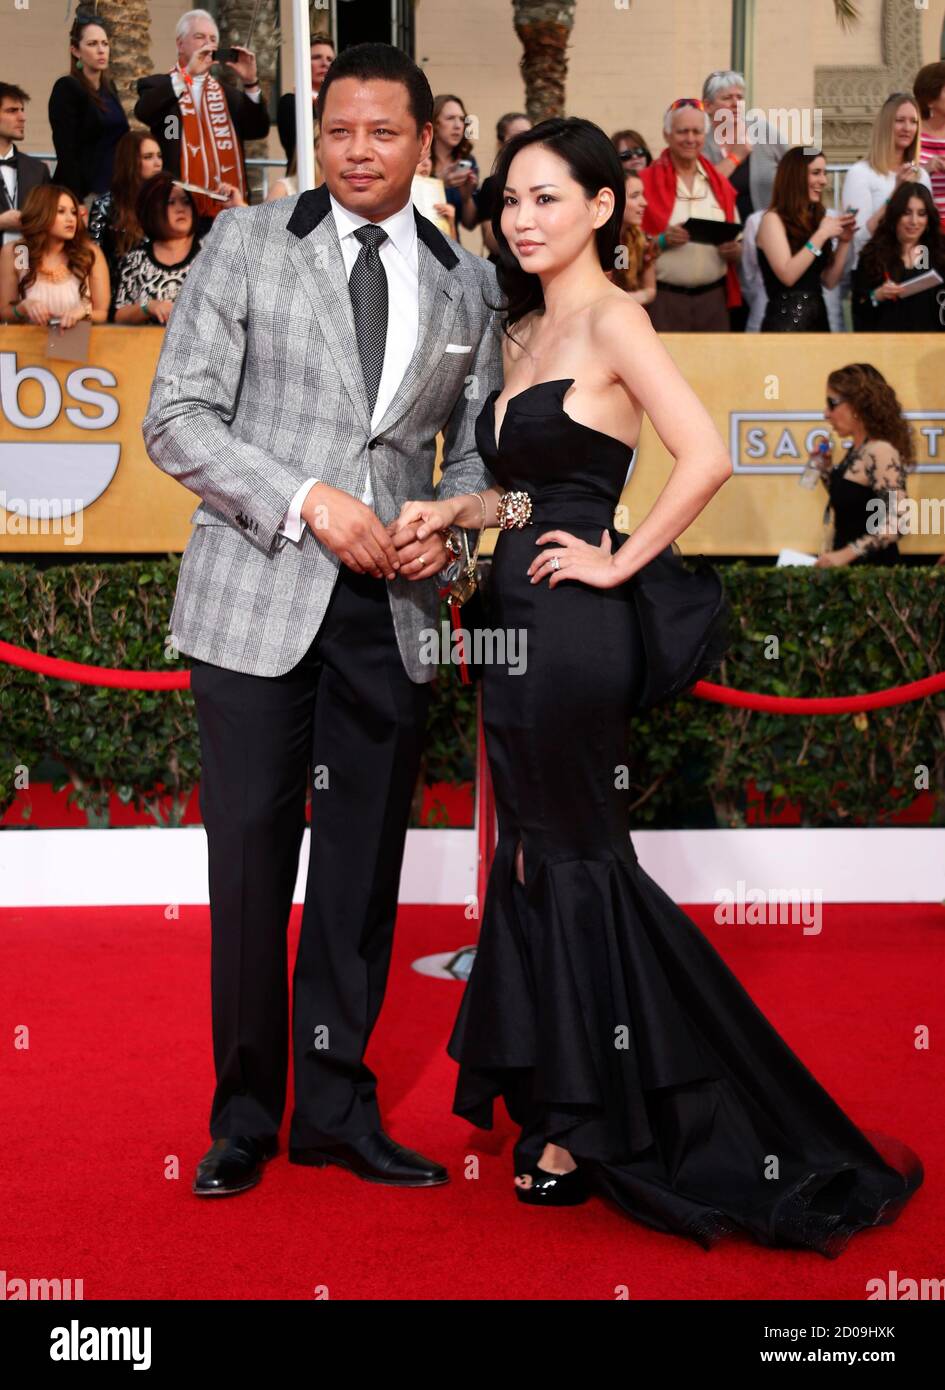 Actor Terrence Howard and wife Miranda arrive at the 20th annual Screen Actors Guild Awards in Los Angeles, California January 18, 2014.  REUTERS/Lucy Nicholson  (UNITED STATES Tags: ENTERTAINMENT)(SAGAWARDS-ARRIVALS) Stock Photo